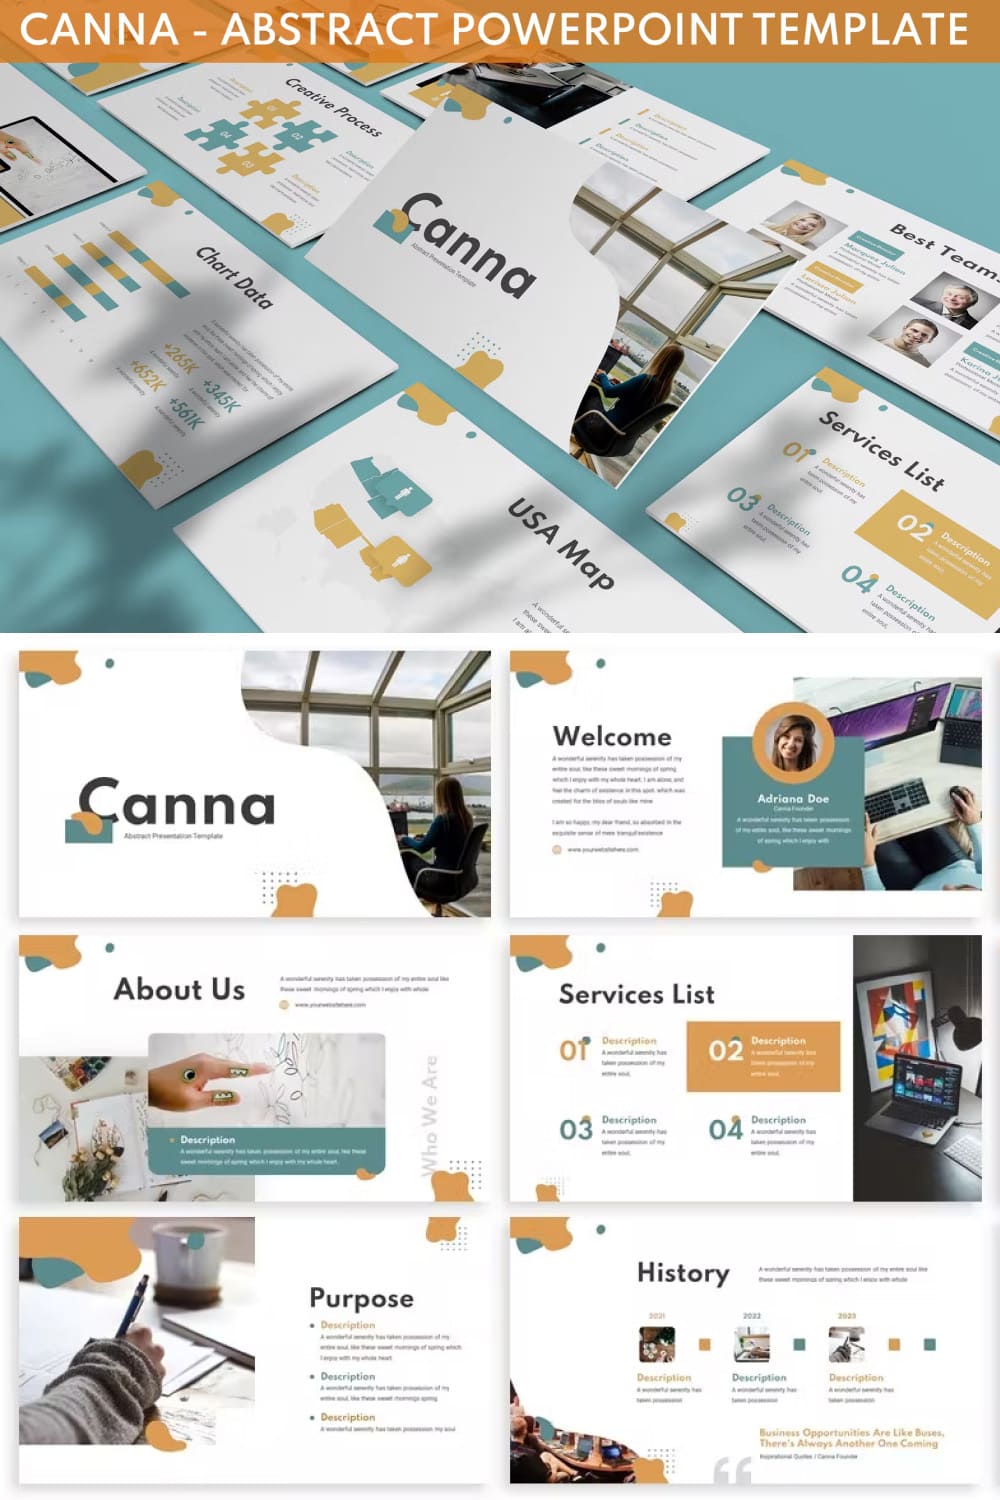 Canna abstract powerpoint template - pinterest image preview.